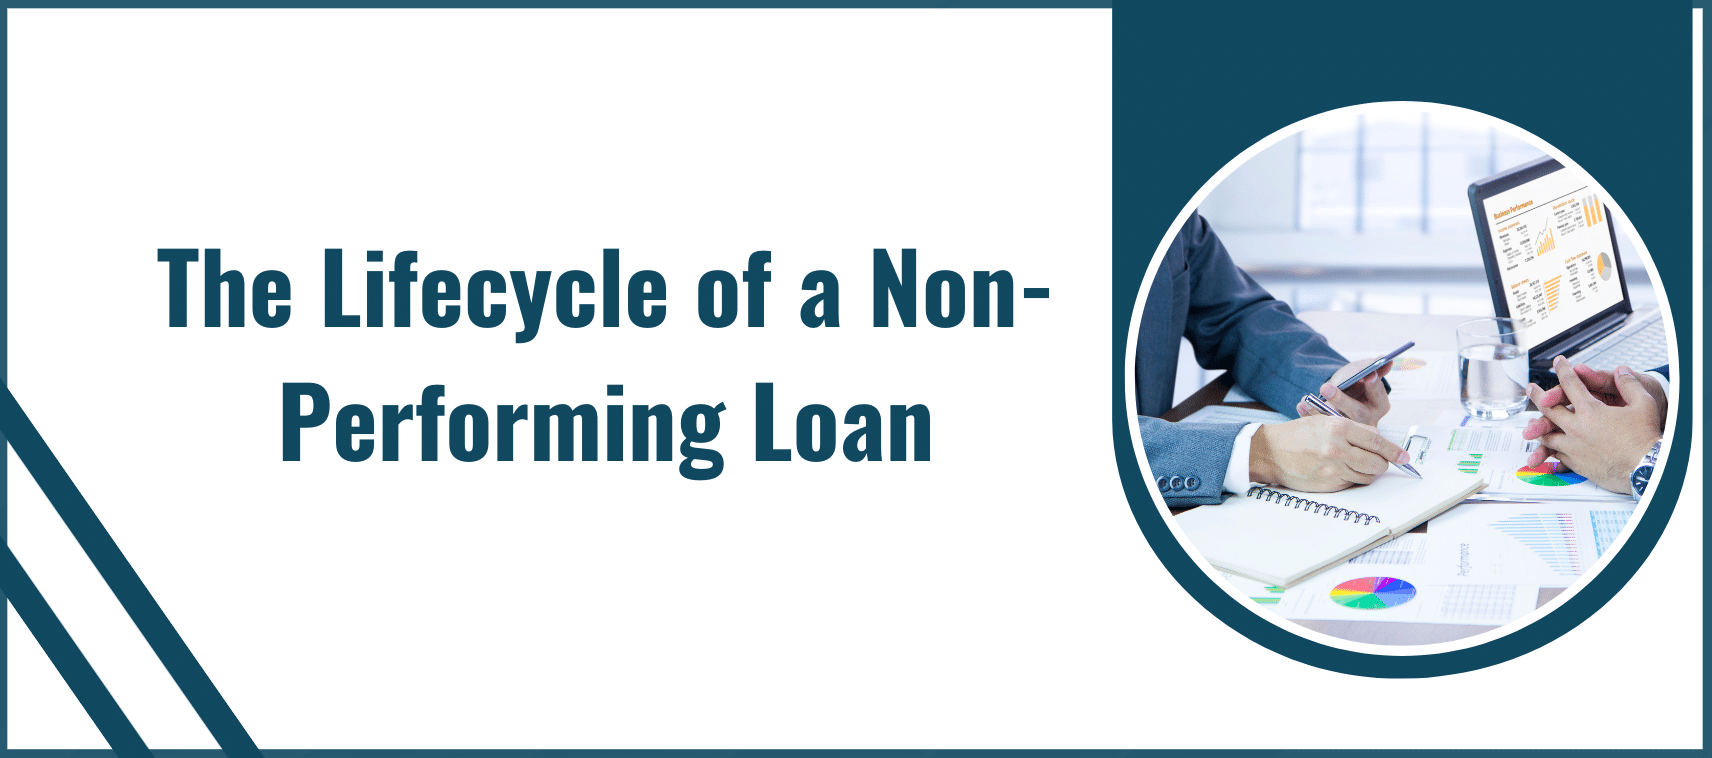 The lifecycle of a non-perfoming loan